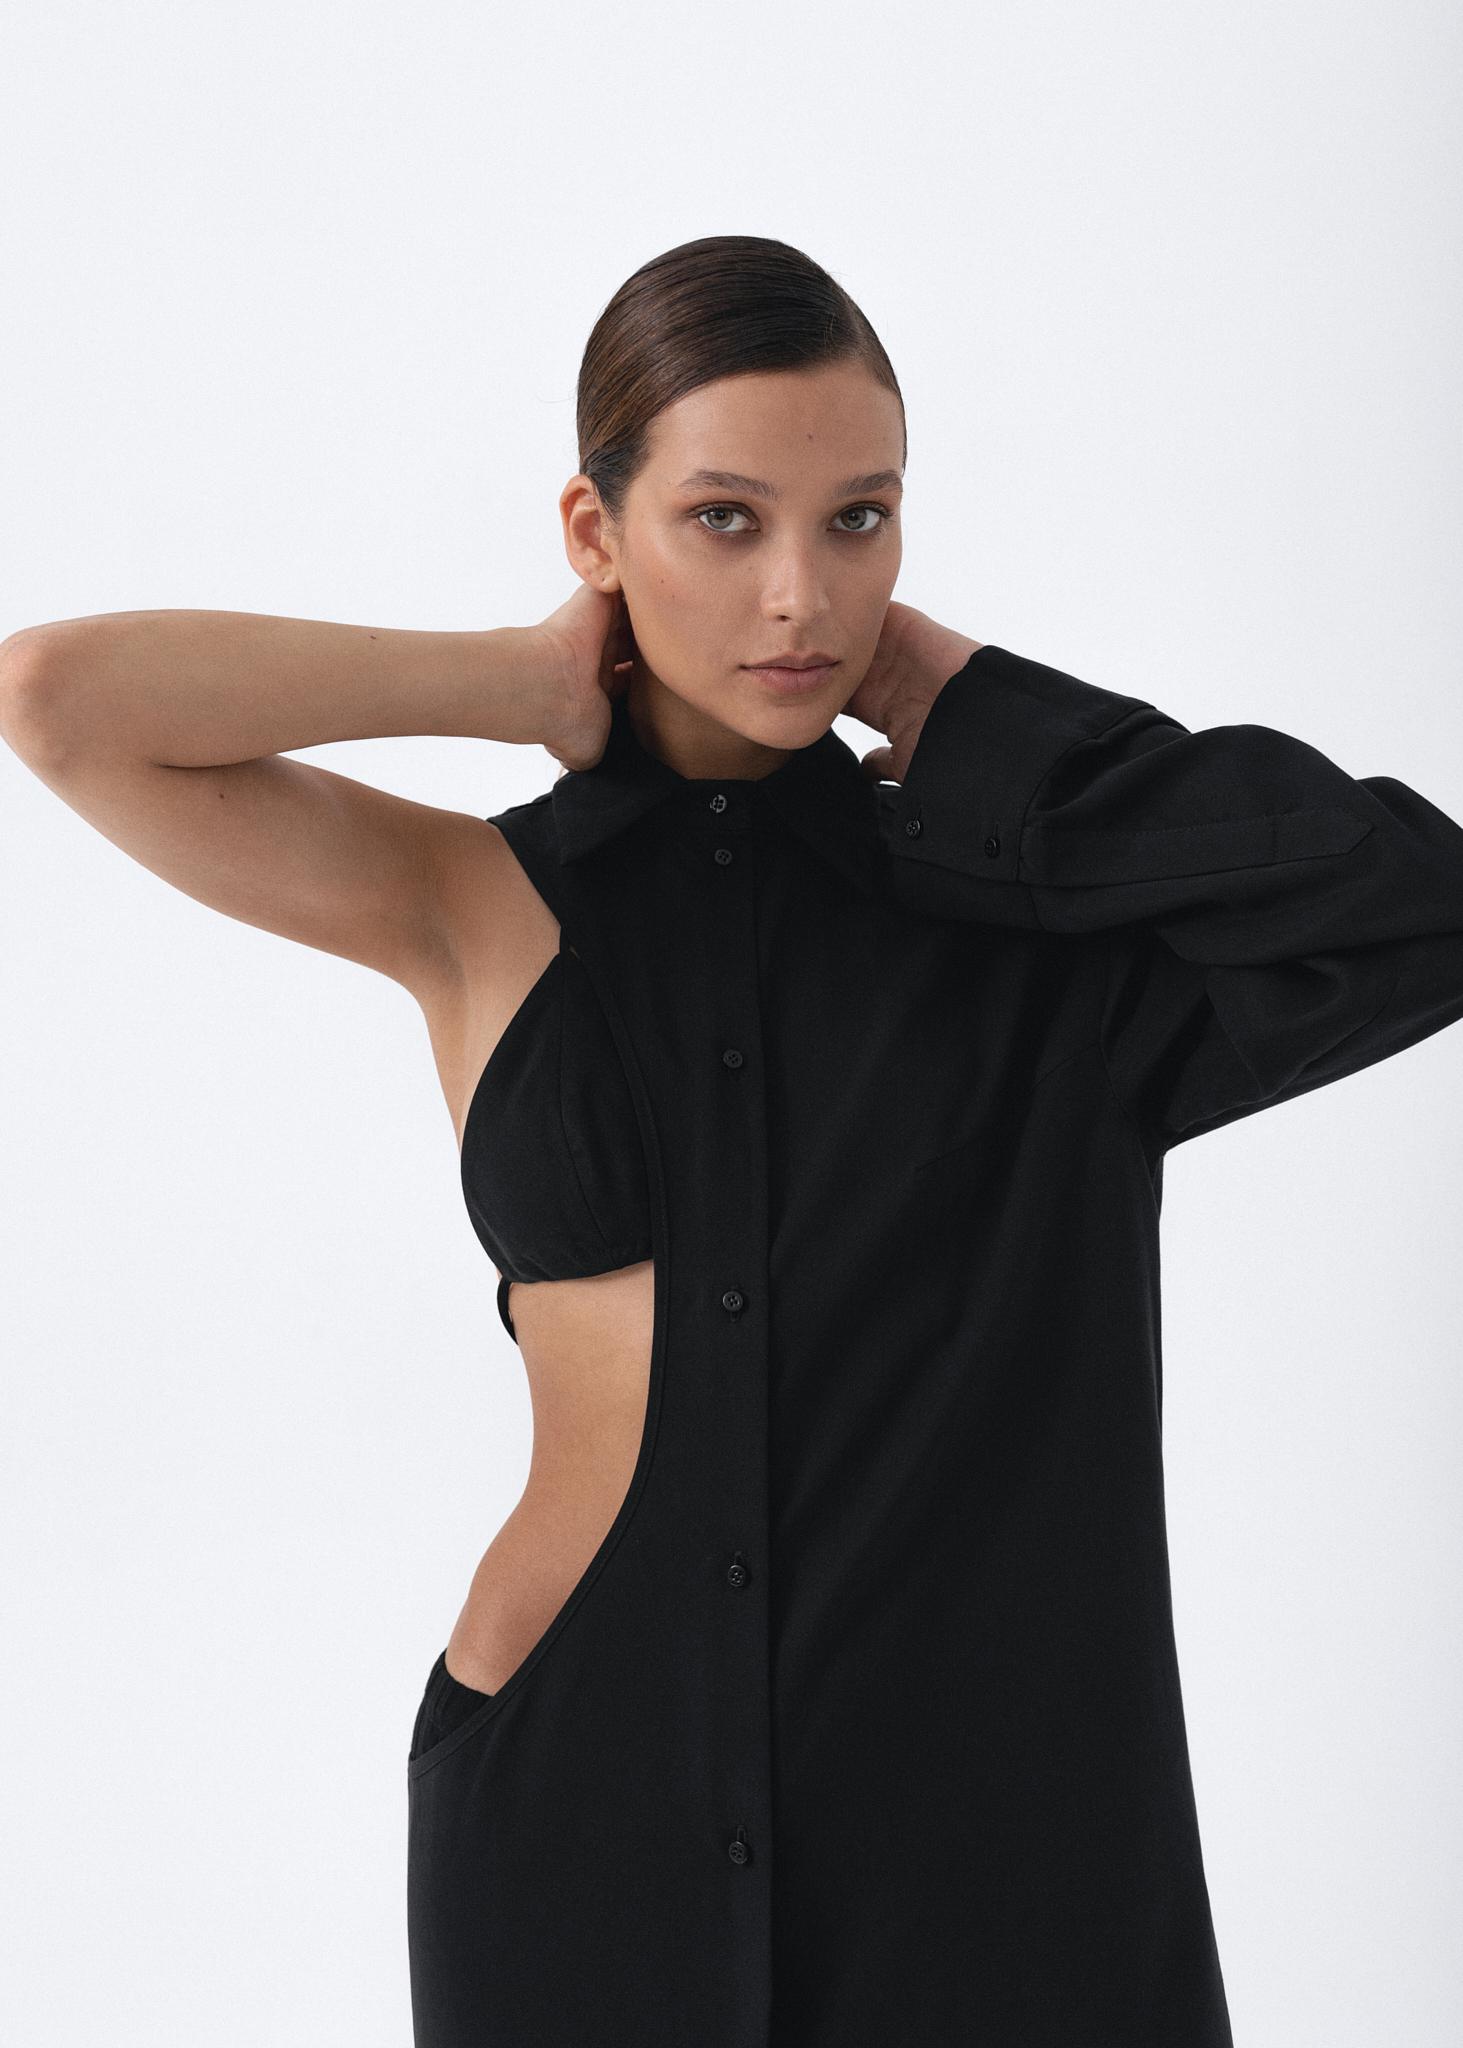 All > Open side shirt dress with bodice Buy from e-shop